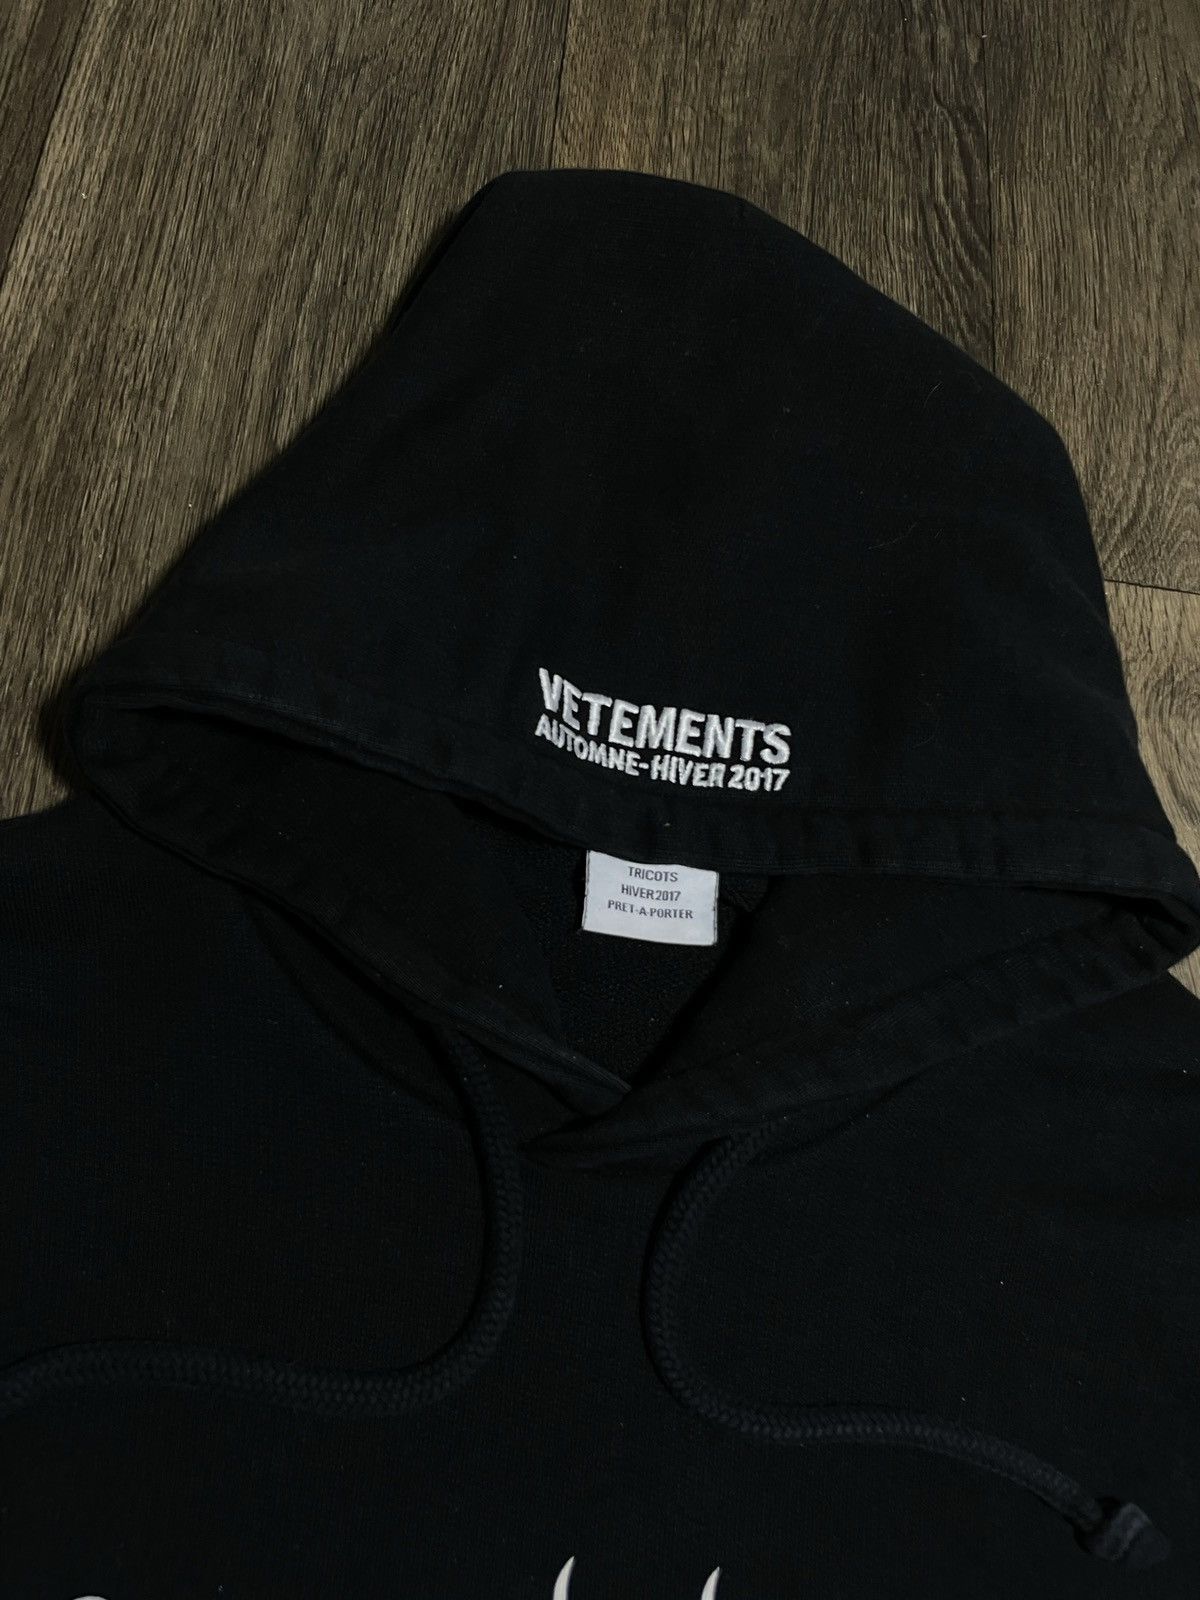 Vetements Vetements Total Fucking Darkness Hoodie Size US L / EU 52-54 / 3 - 12 Preview